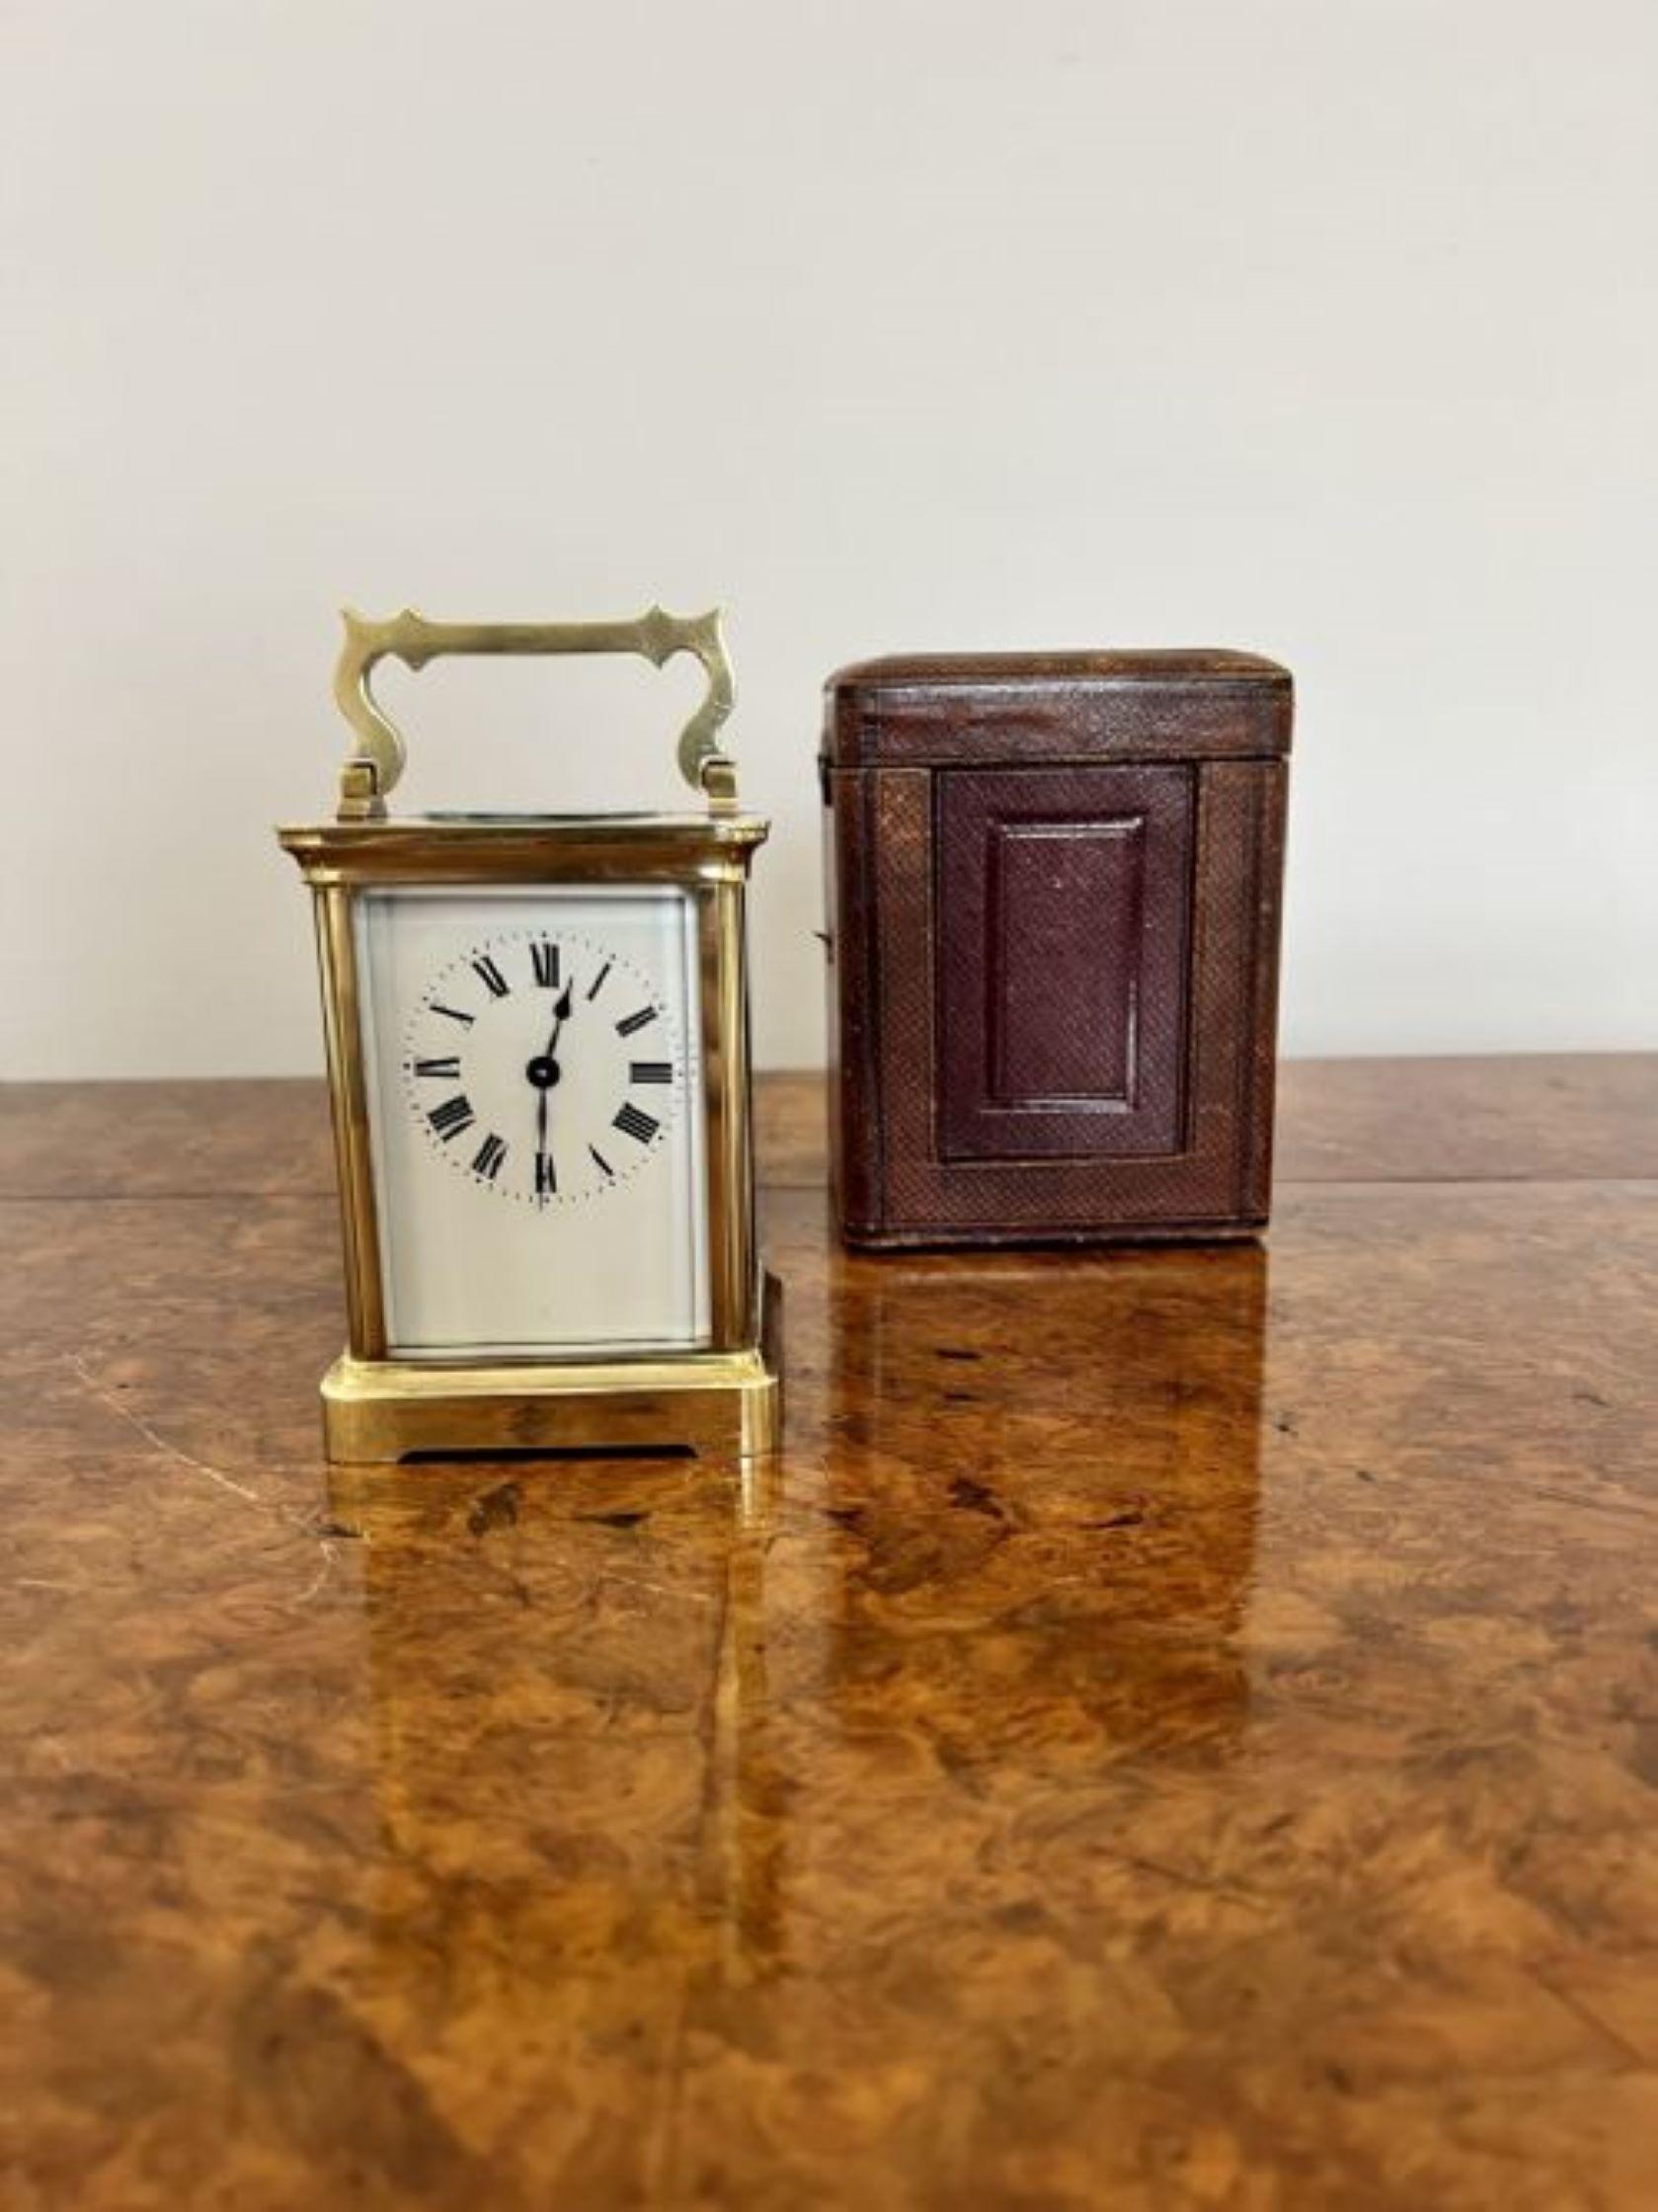 Antique Victorian quality brass carriage clock with the original leather travelling case, having a quality brass carriage clock with an eight day French movement, bevelled edge, glass panels and a shaped carrying handle to the top.
Please note all